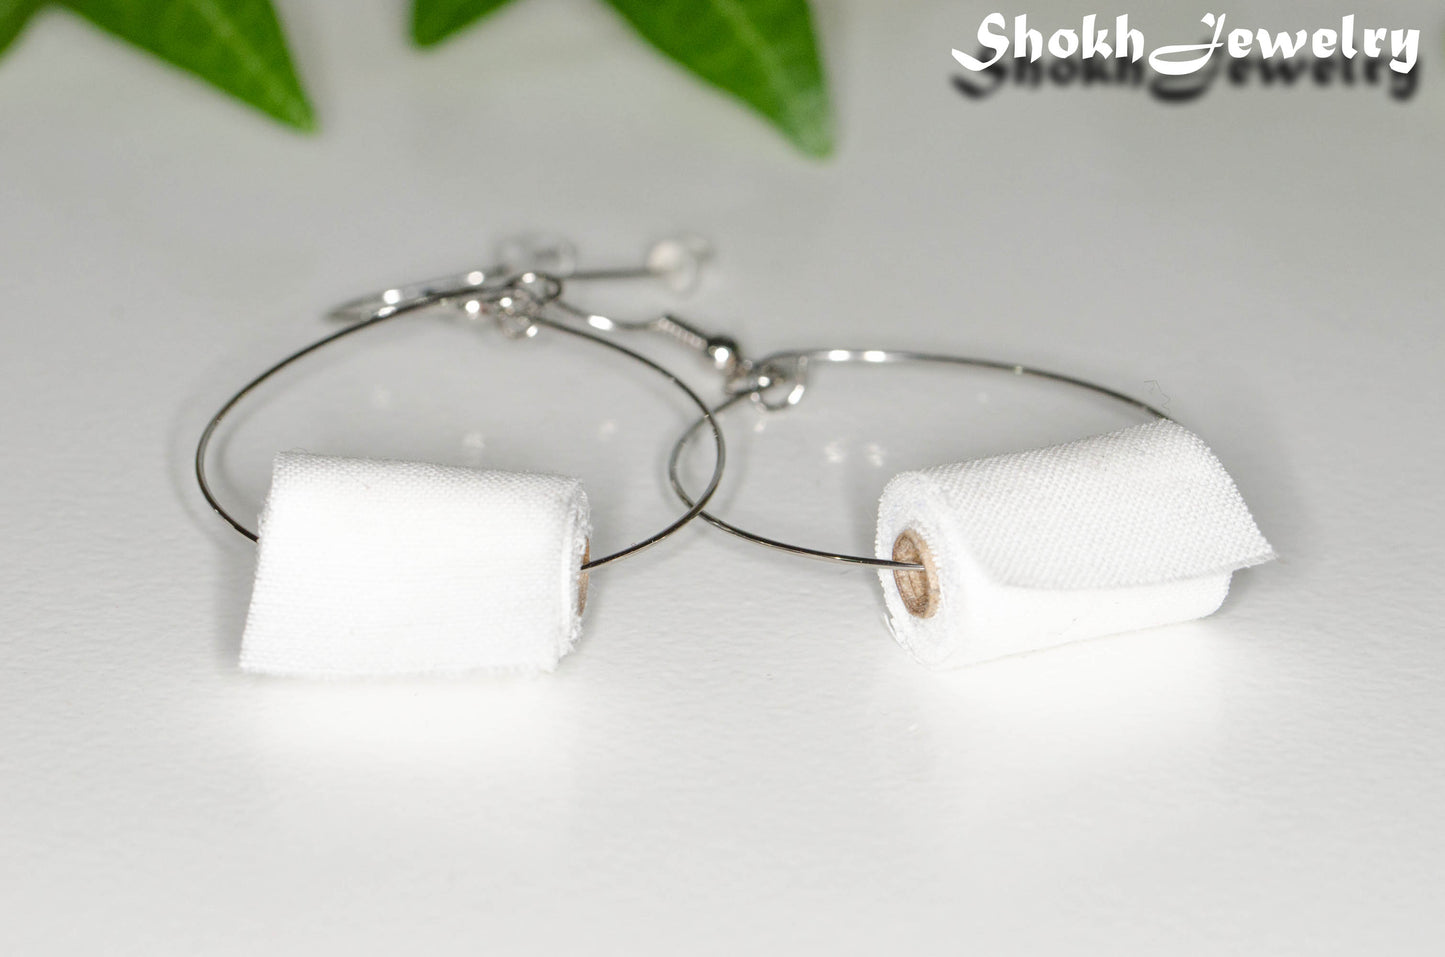 Close up of Large Miniature Toilet Paper Roll Earrings.